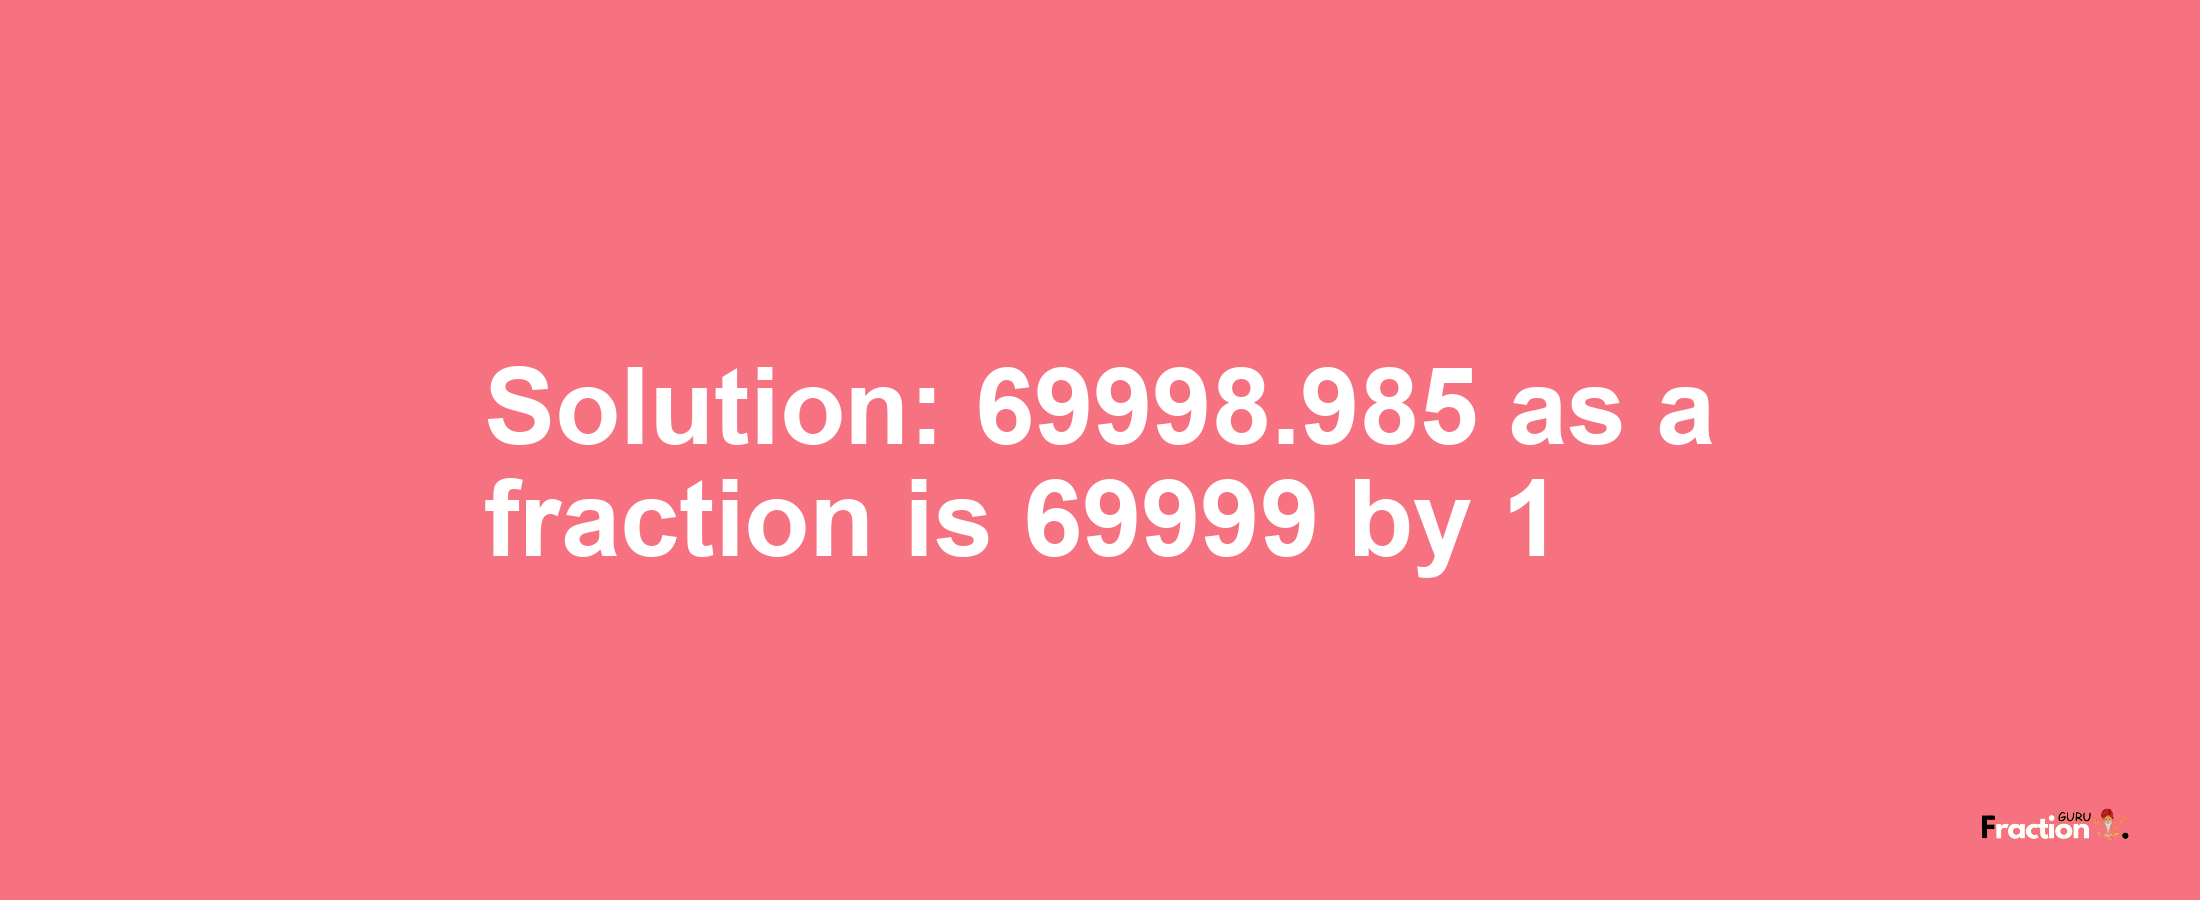 Solution:69998.985 as a fraction is 69999/1